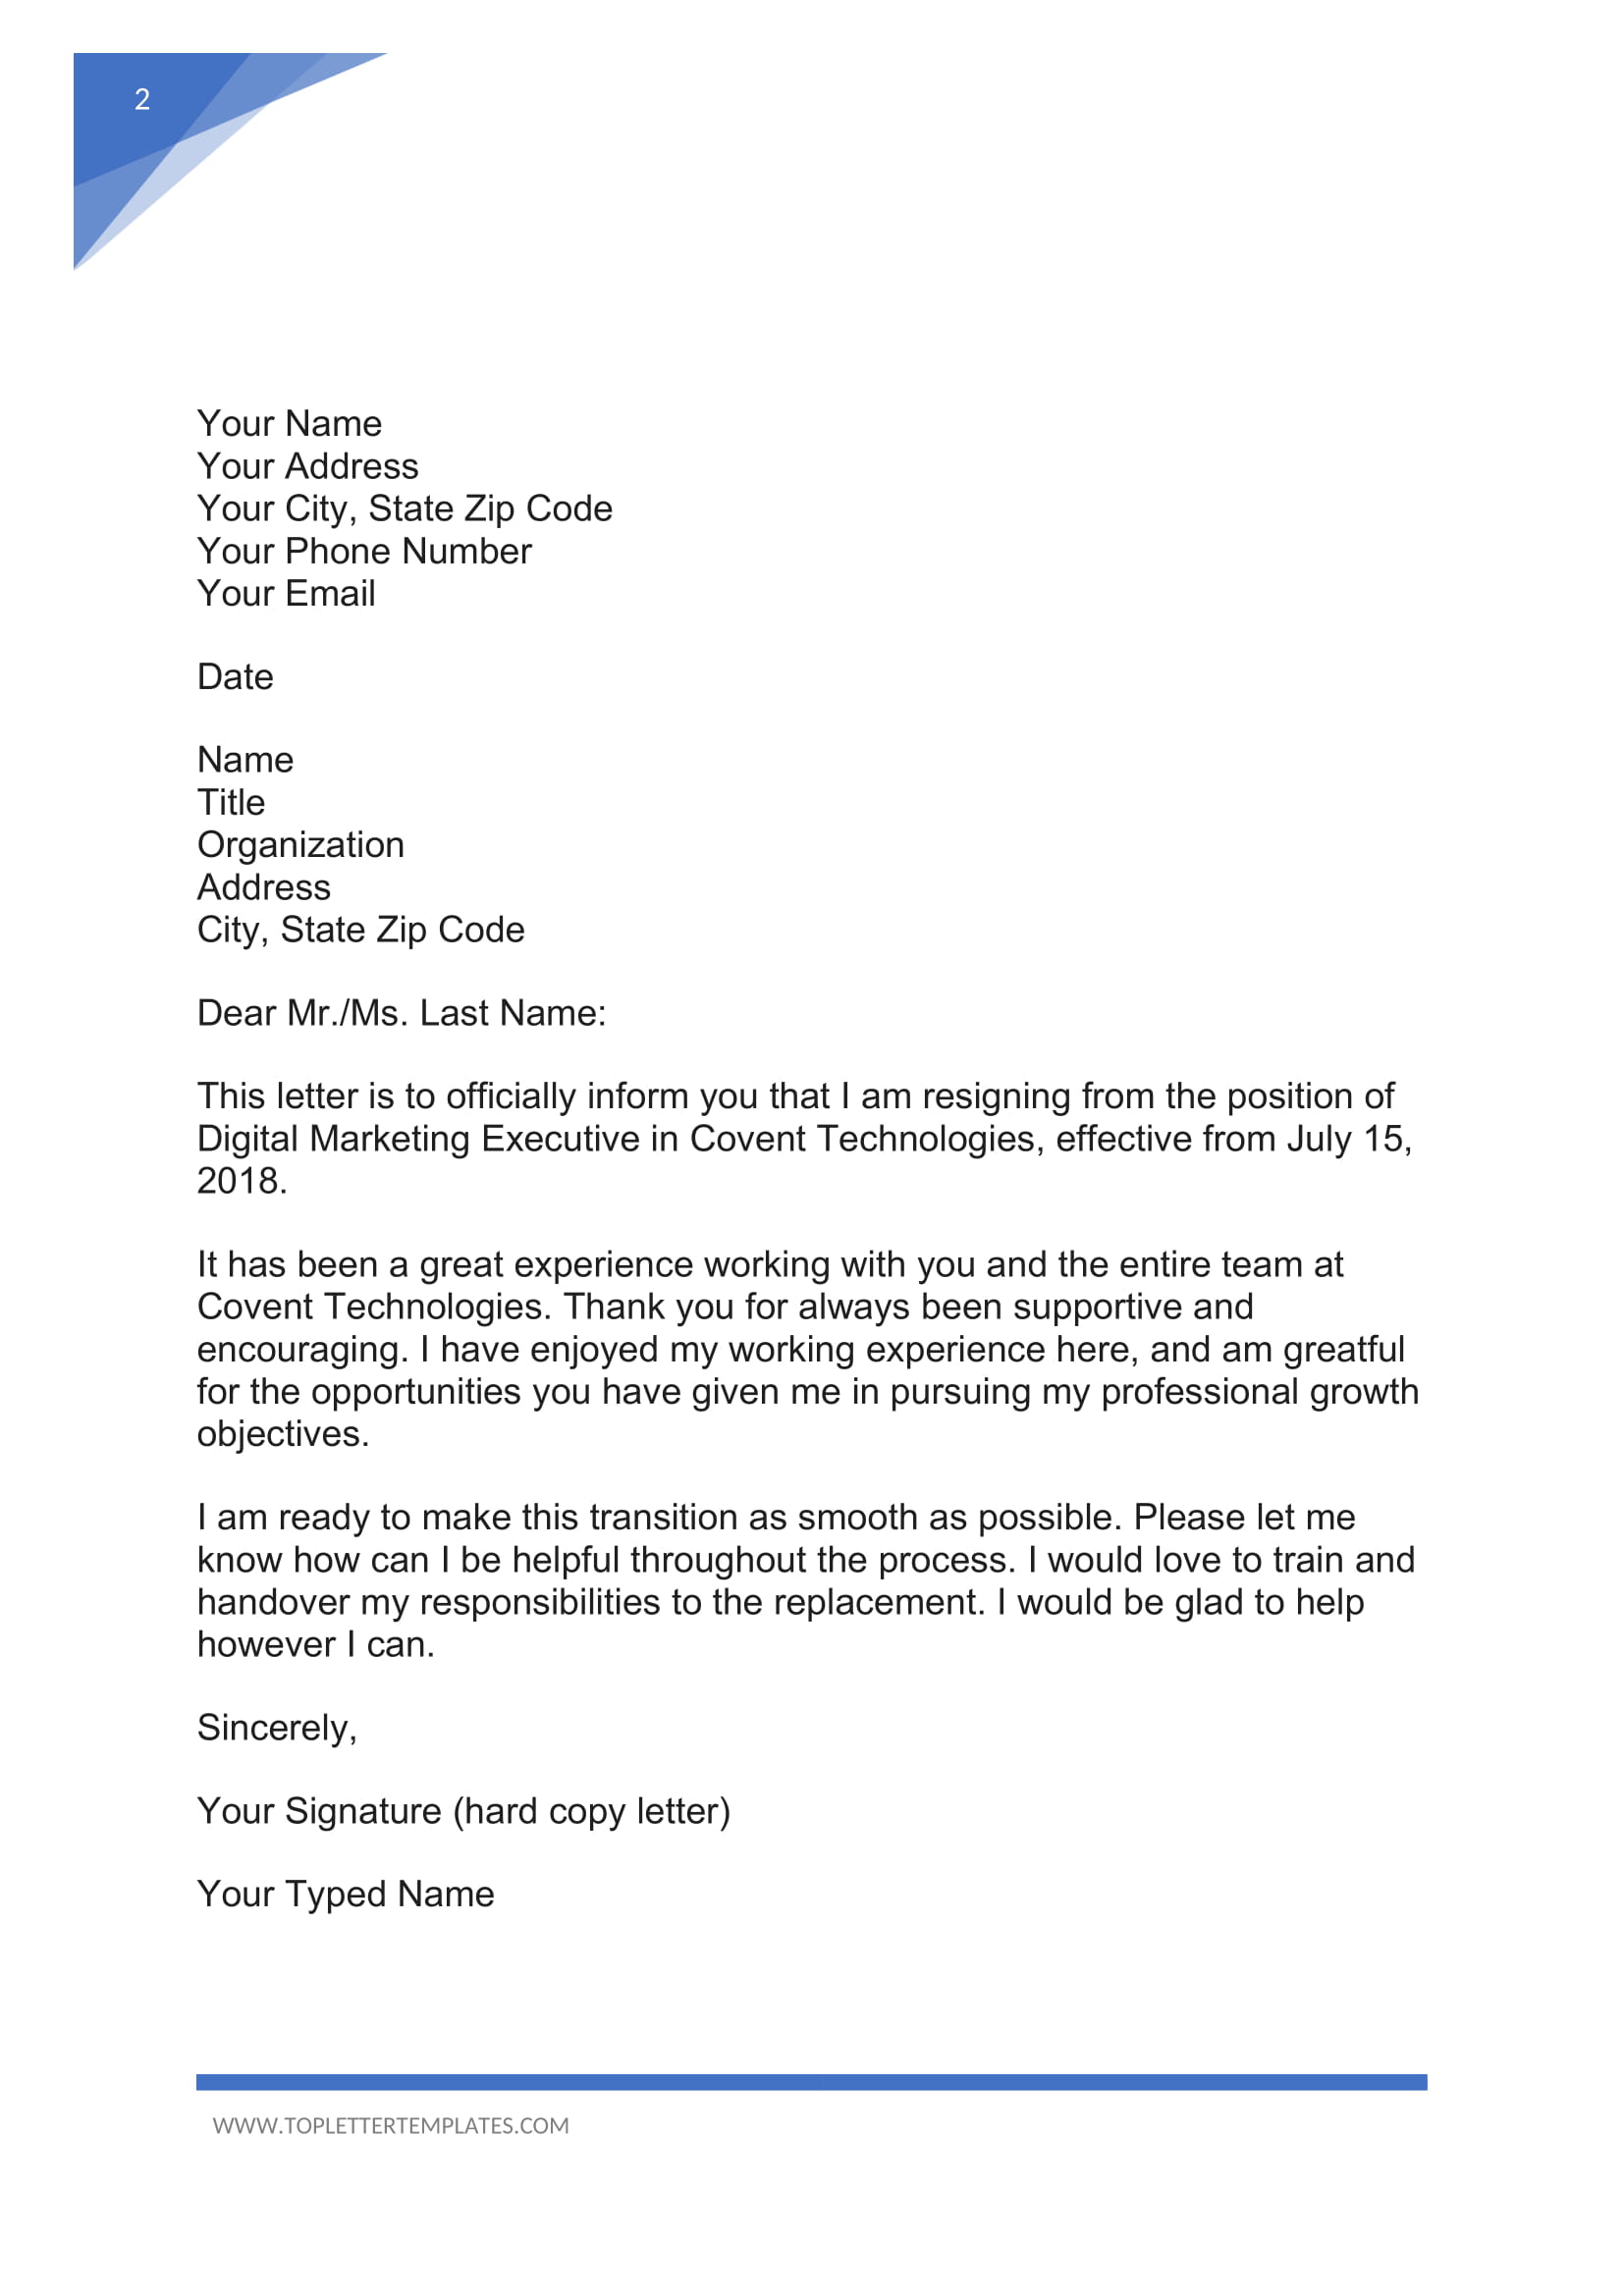 Resignation Letter Example Email from toplettertemplates.com